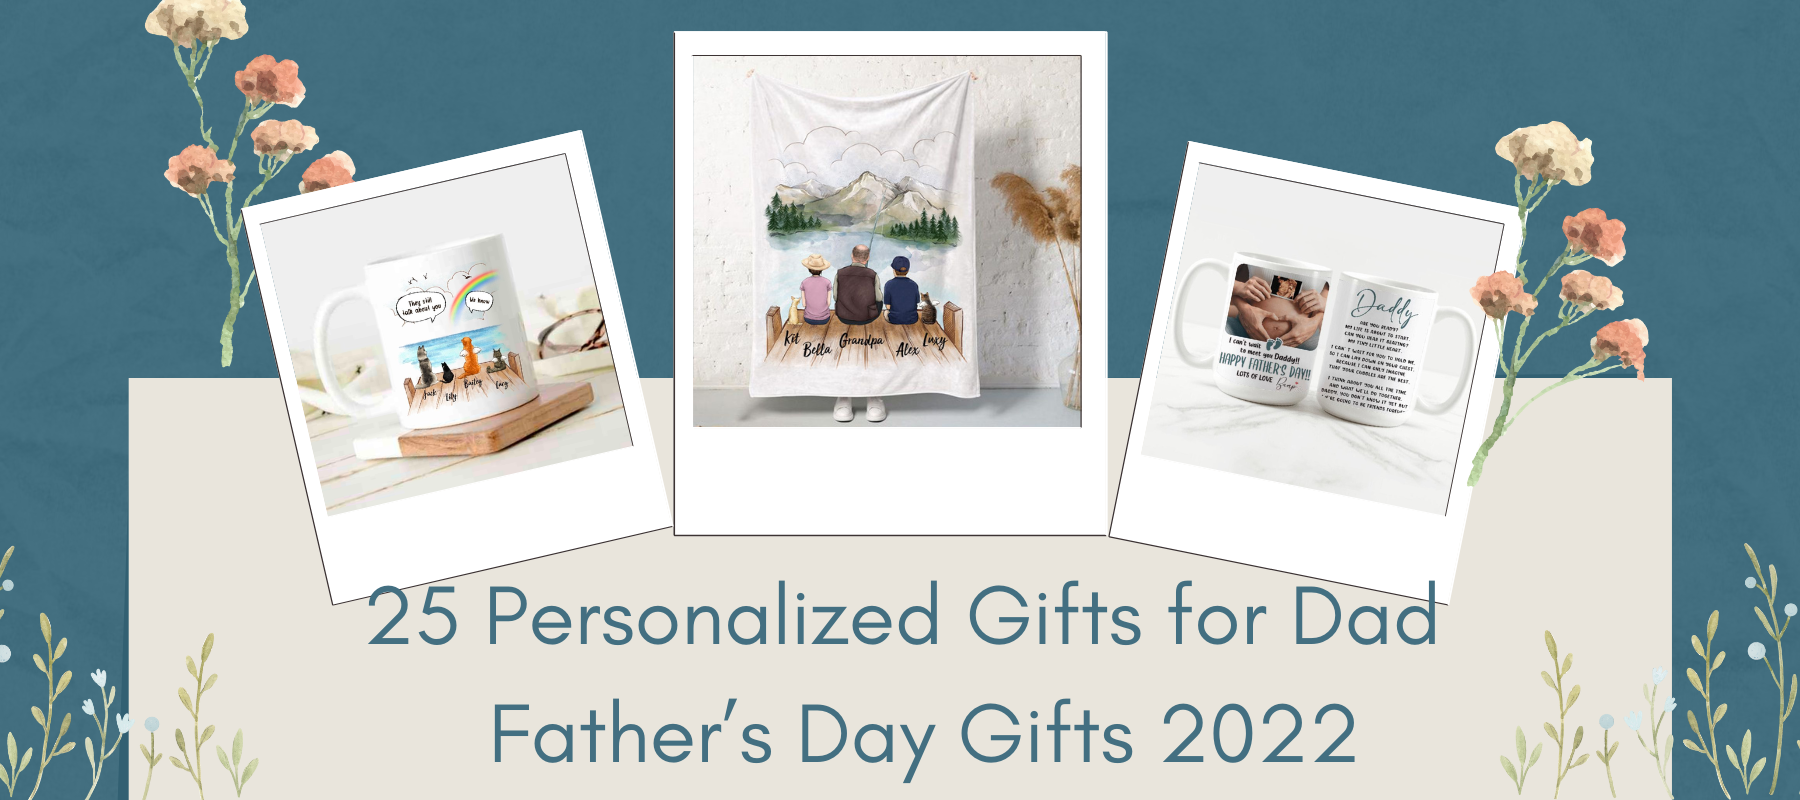 25 Personalized Father's Day Gifts - Father's Day 2022